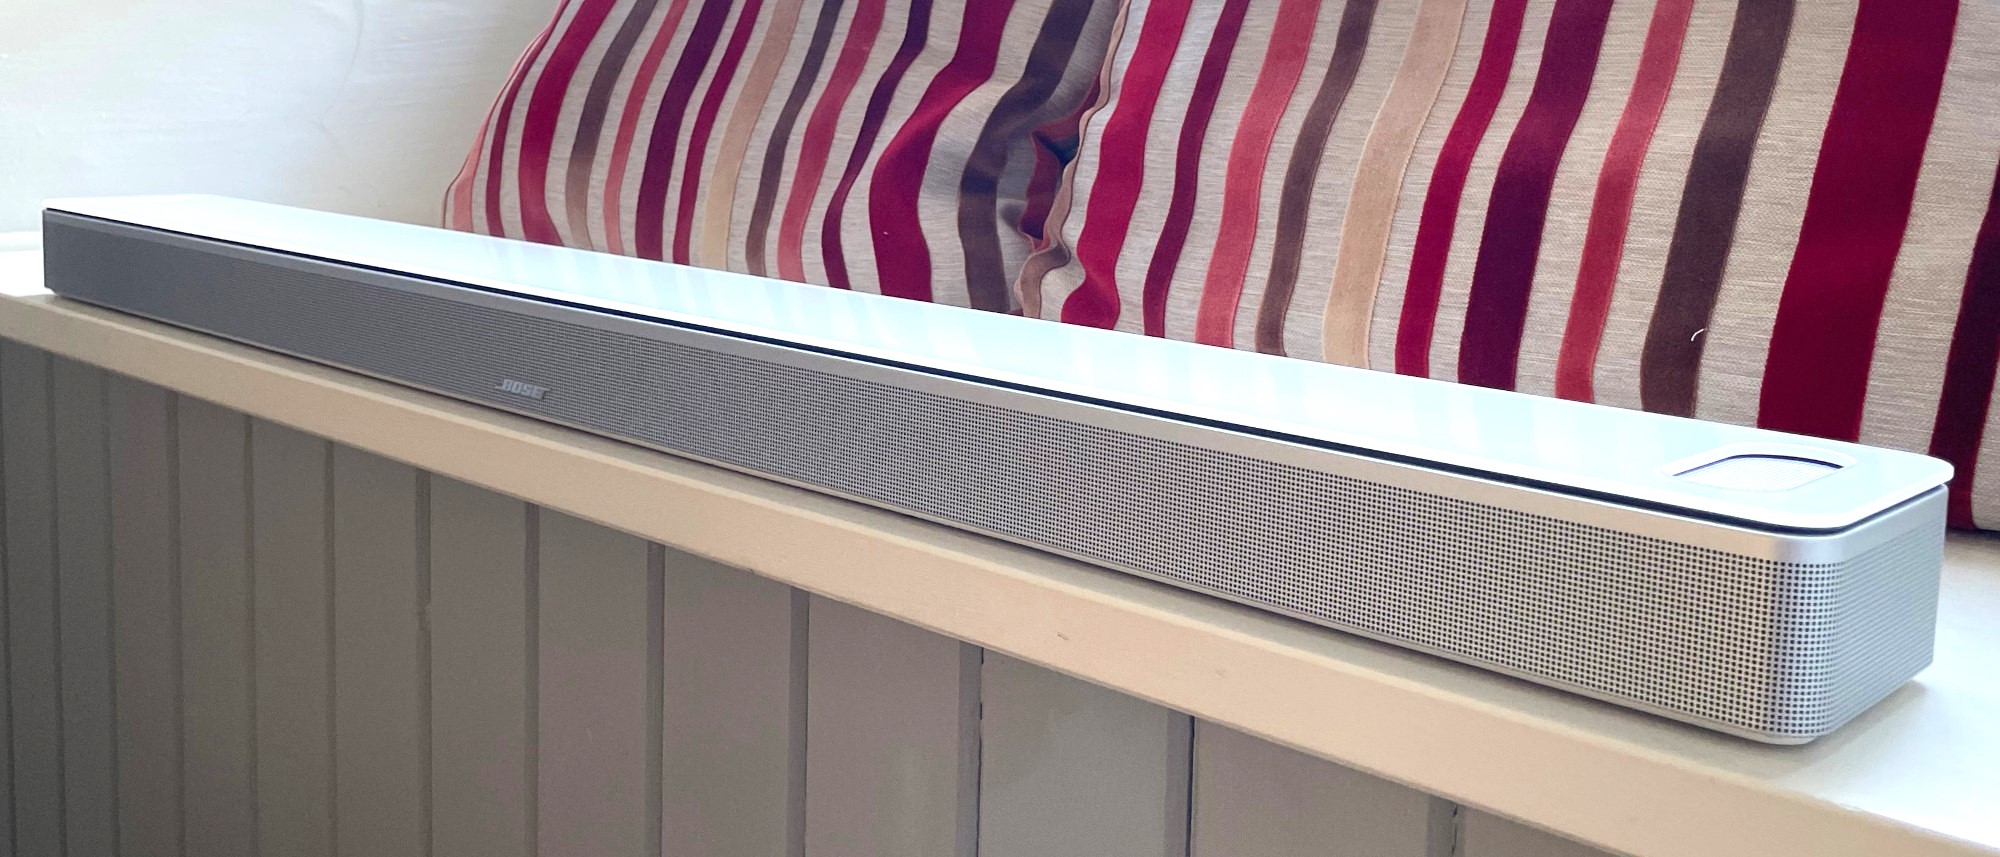 How To Connect To A Bose Soundbar